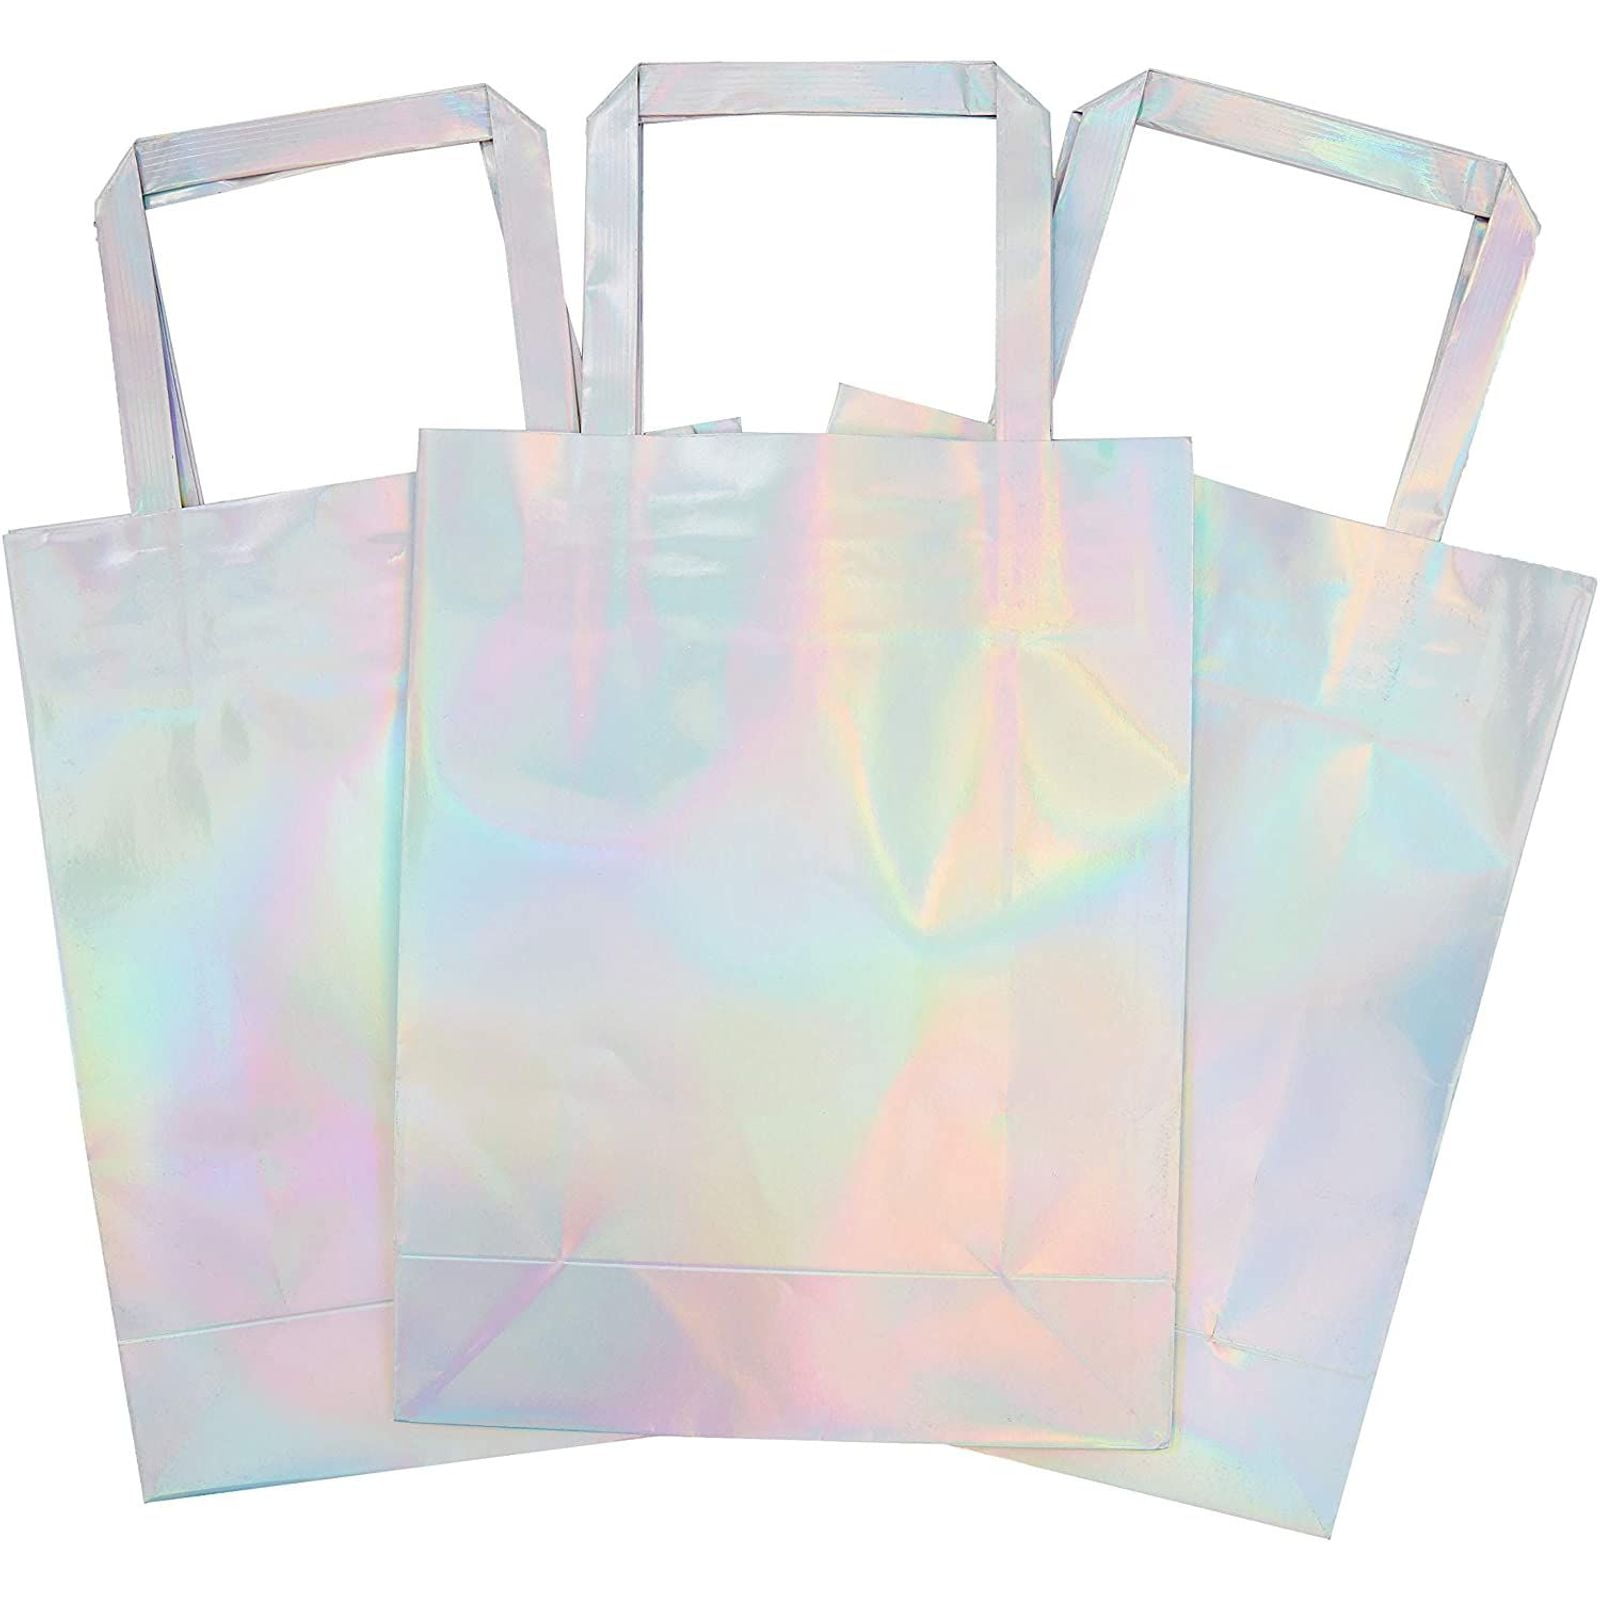 6 HOLOGRAPHIC FOIL GIFT BAGS IN 3 COLOURS & 3 SIZES